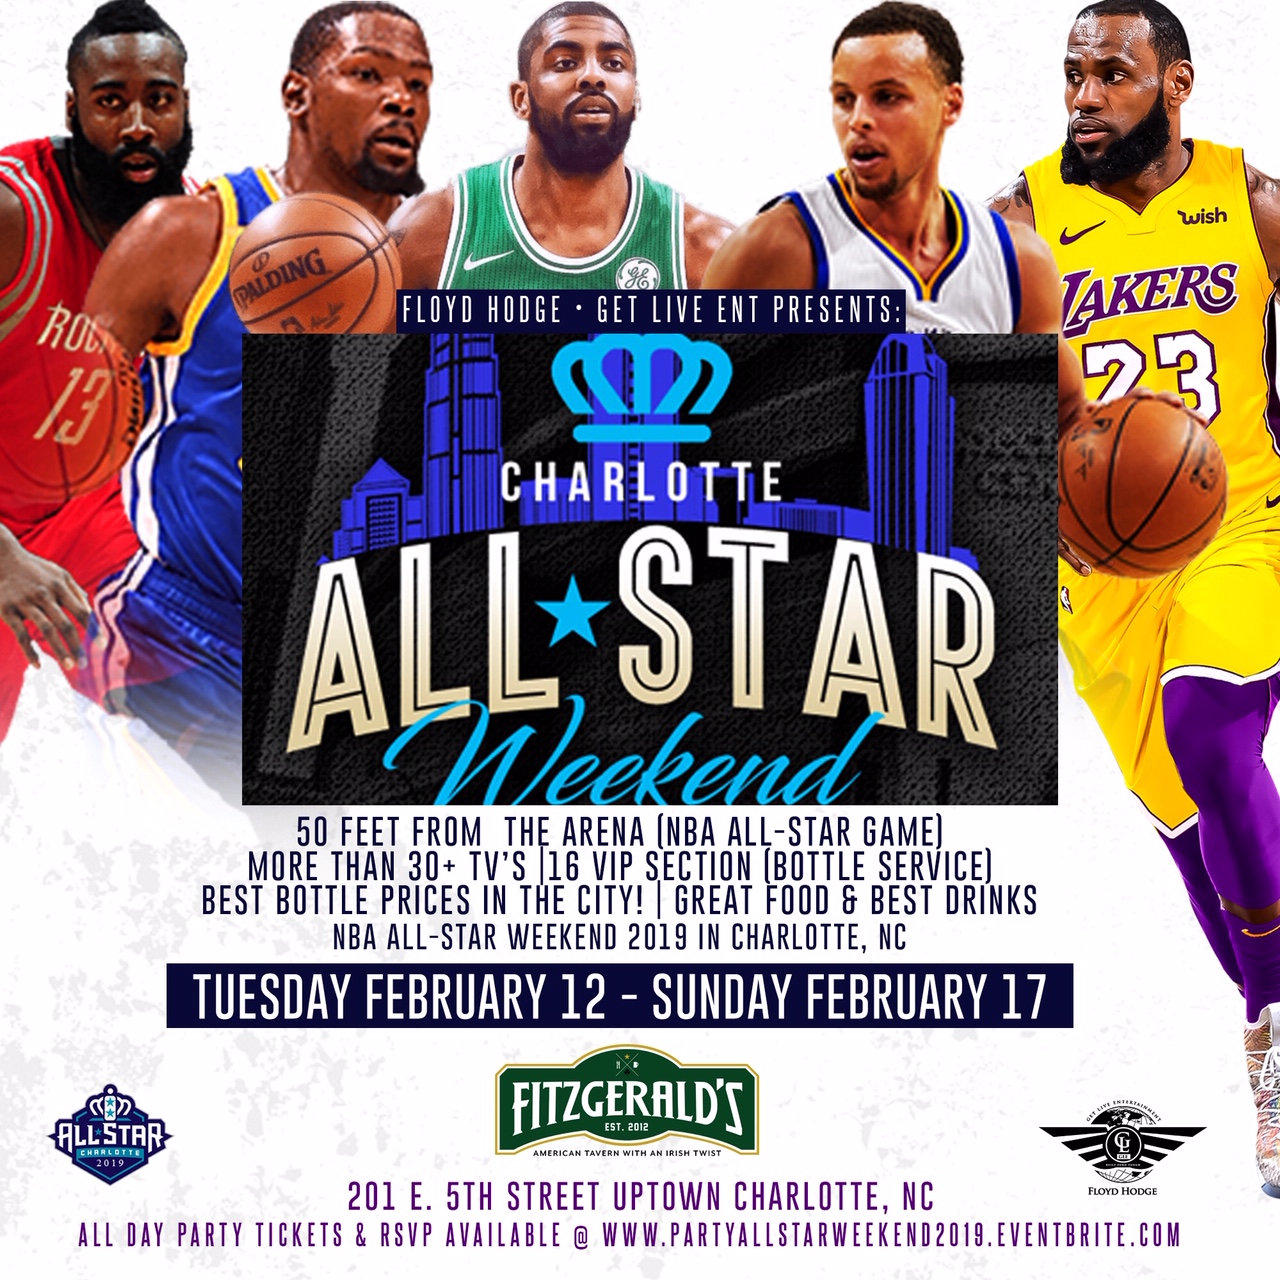 ALL-STAR 2019 weekend Charlotte Party Pass Tickets, Tue, Feb 12, 2019 at 7:00 PM ...1280 x 1280